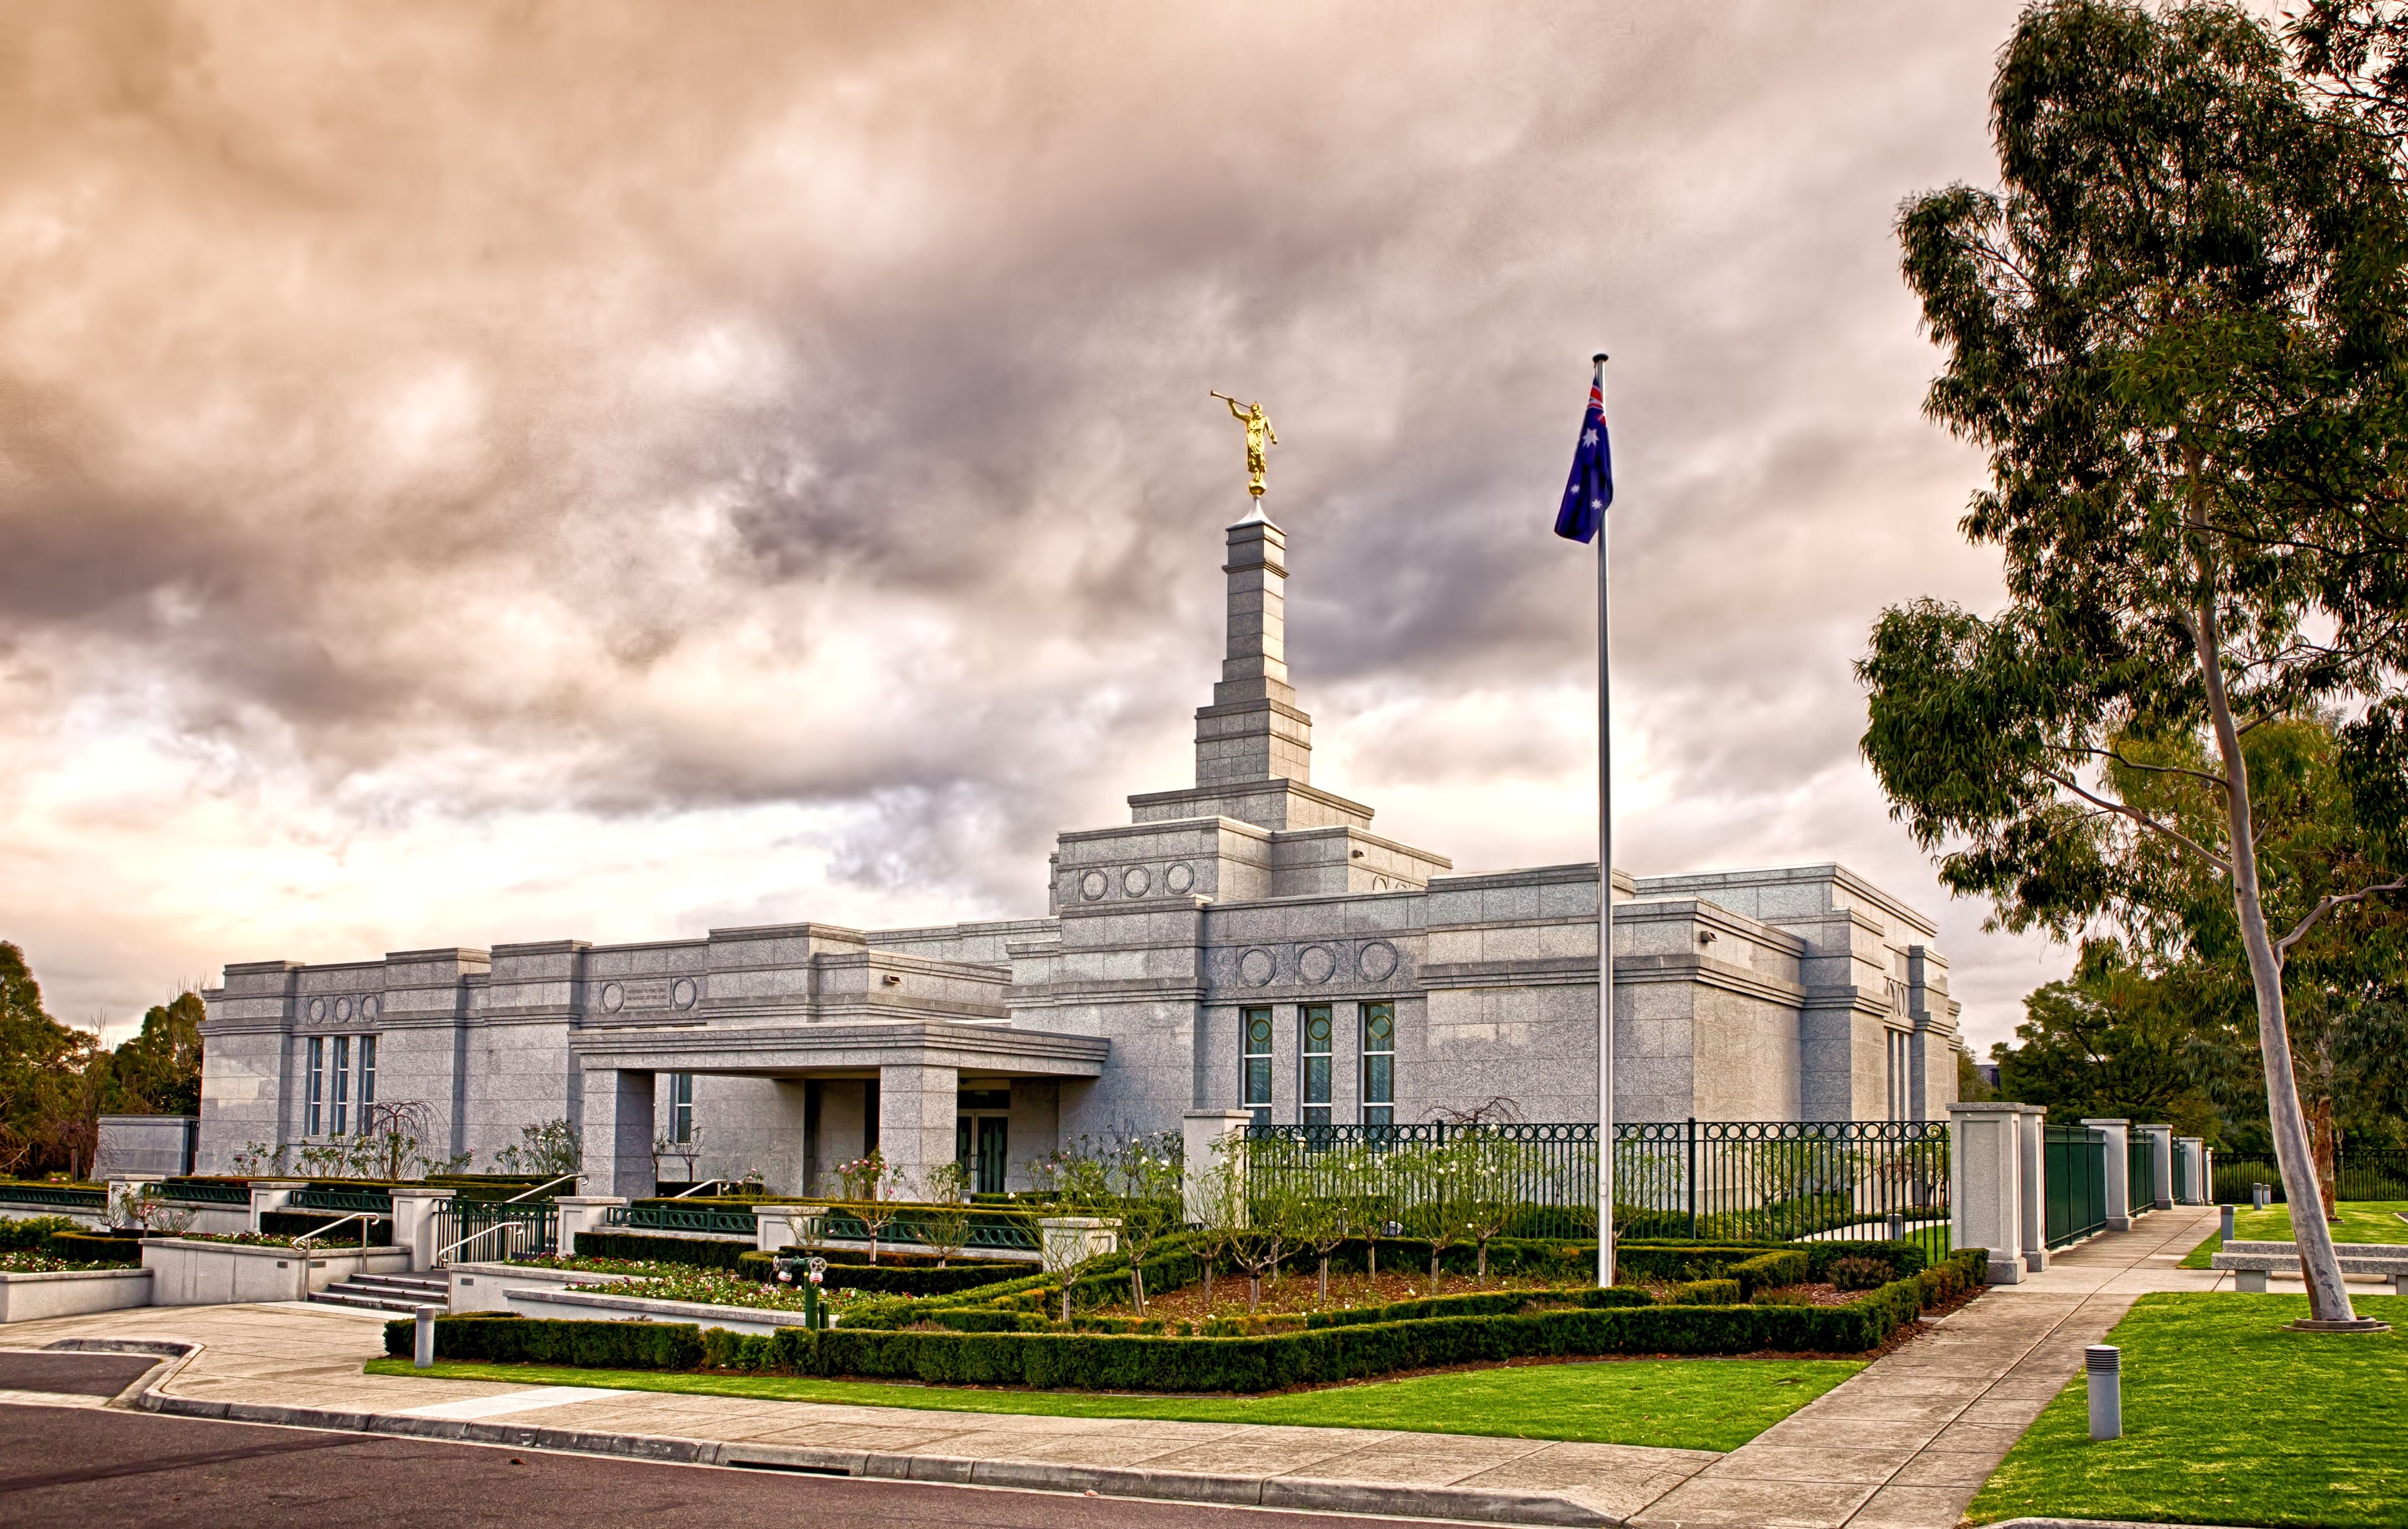 The Melbourne Australia Temple, including the entrance and scenery.